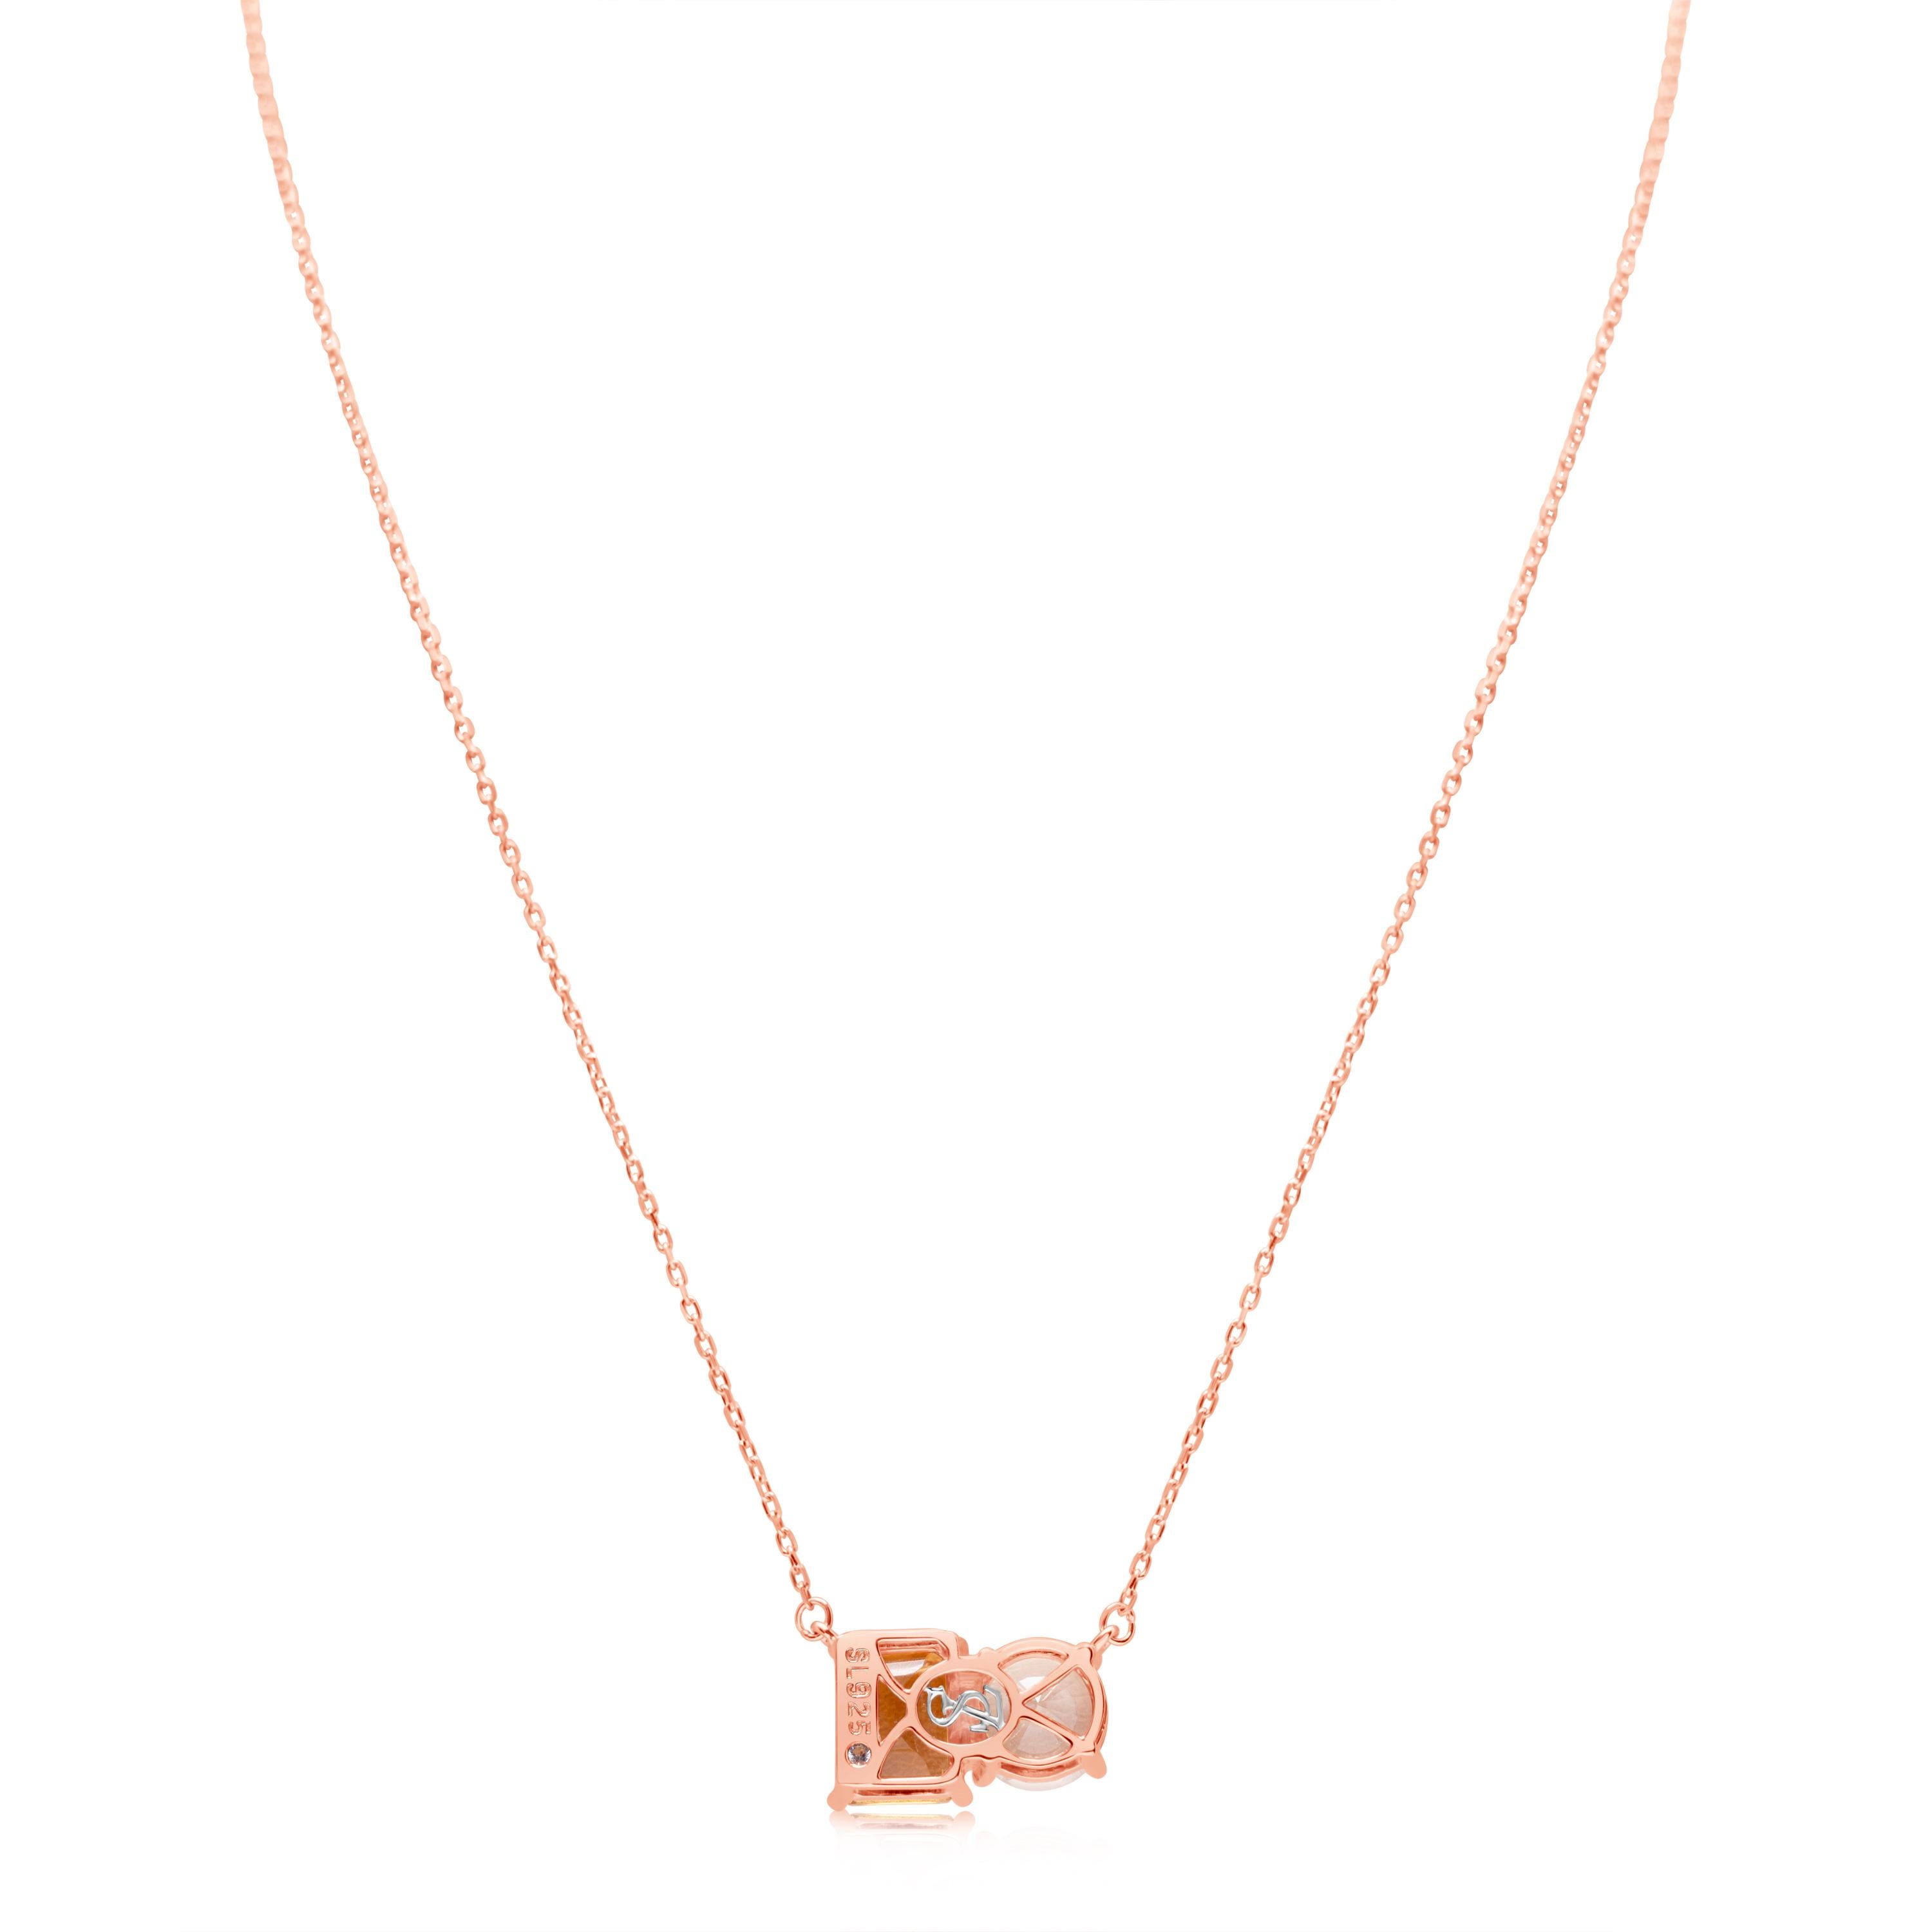 Shimmering in hues of white and orange, this Suzy Levian necklace is as on trend as can be, and features a round cut white topaz and an emerald cut orange citrine as a perfectly matched pair. This necklace symbolizes a perfect pairing of unique